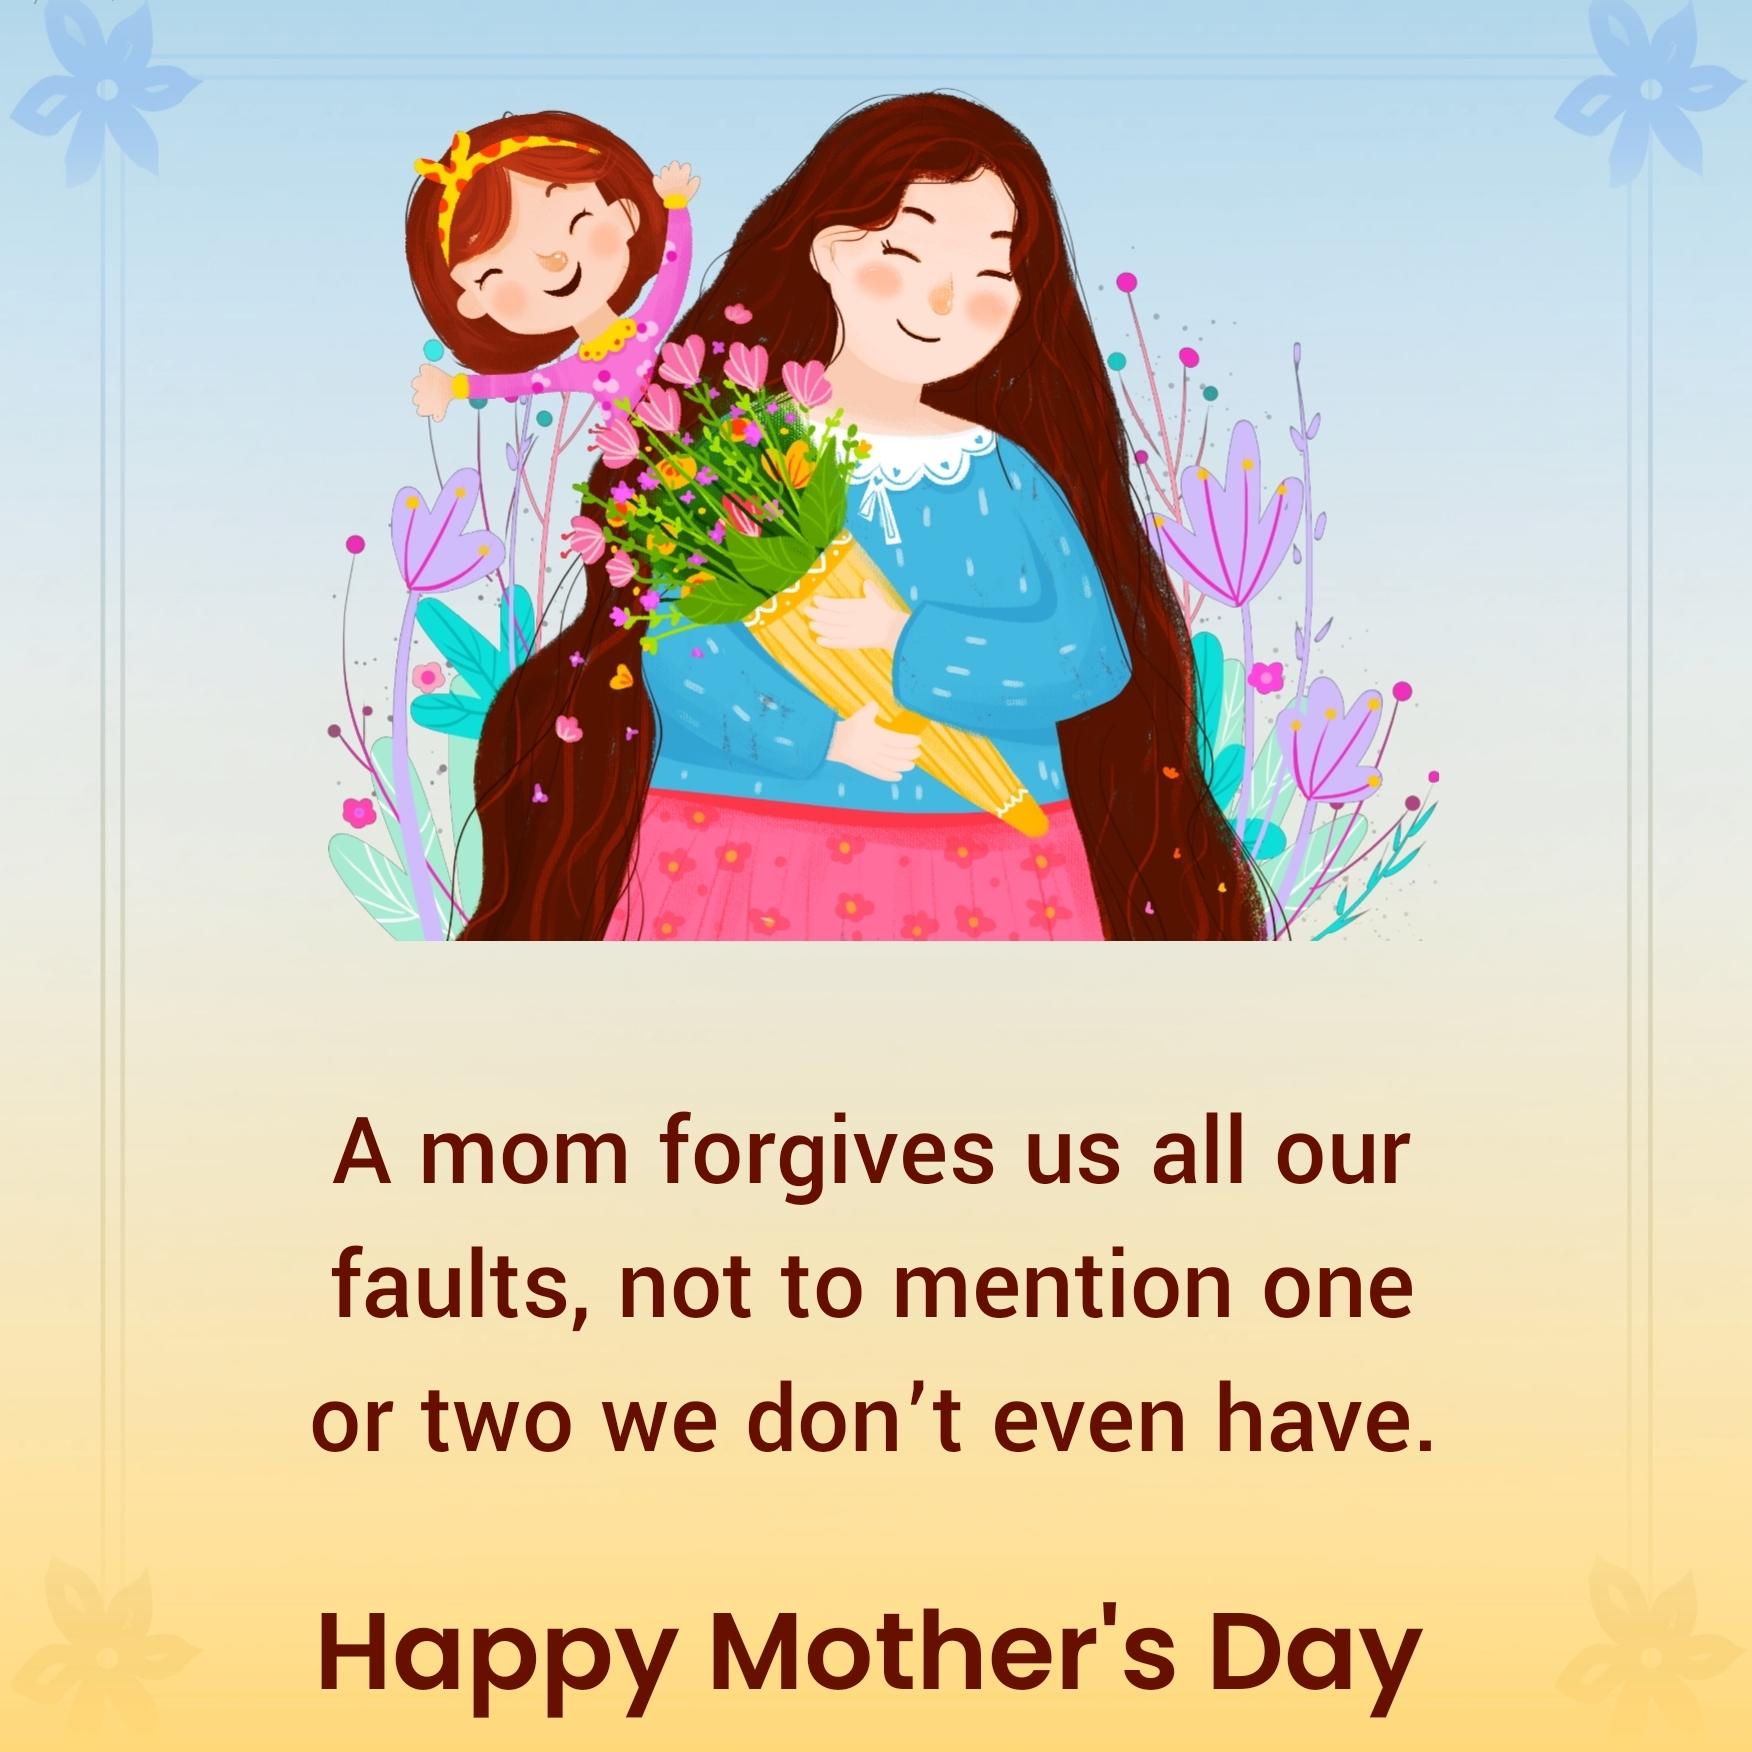 A mom forgives us all our faults not to mention one